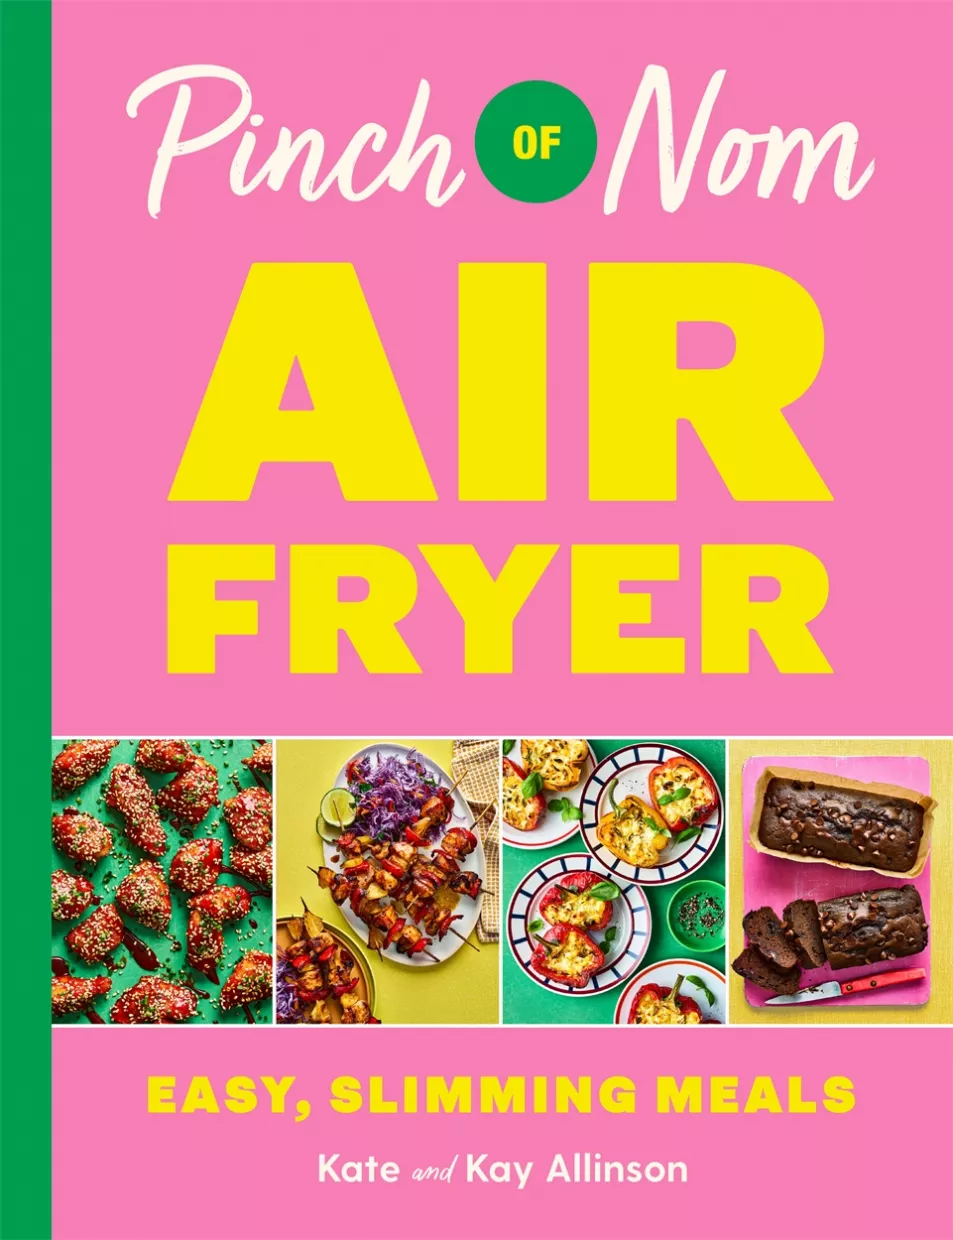 Pinch Of Nom Air Fryer by Kate and Kay Allinson